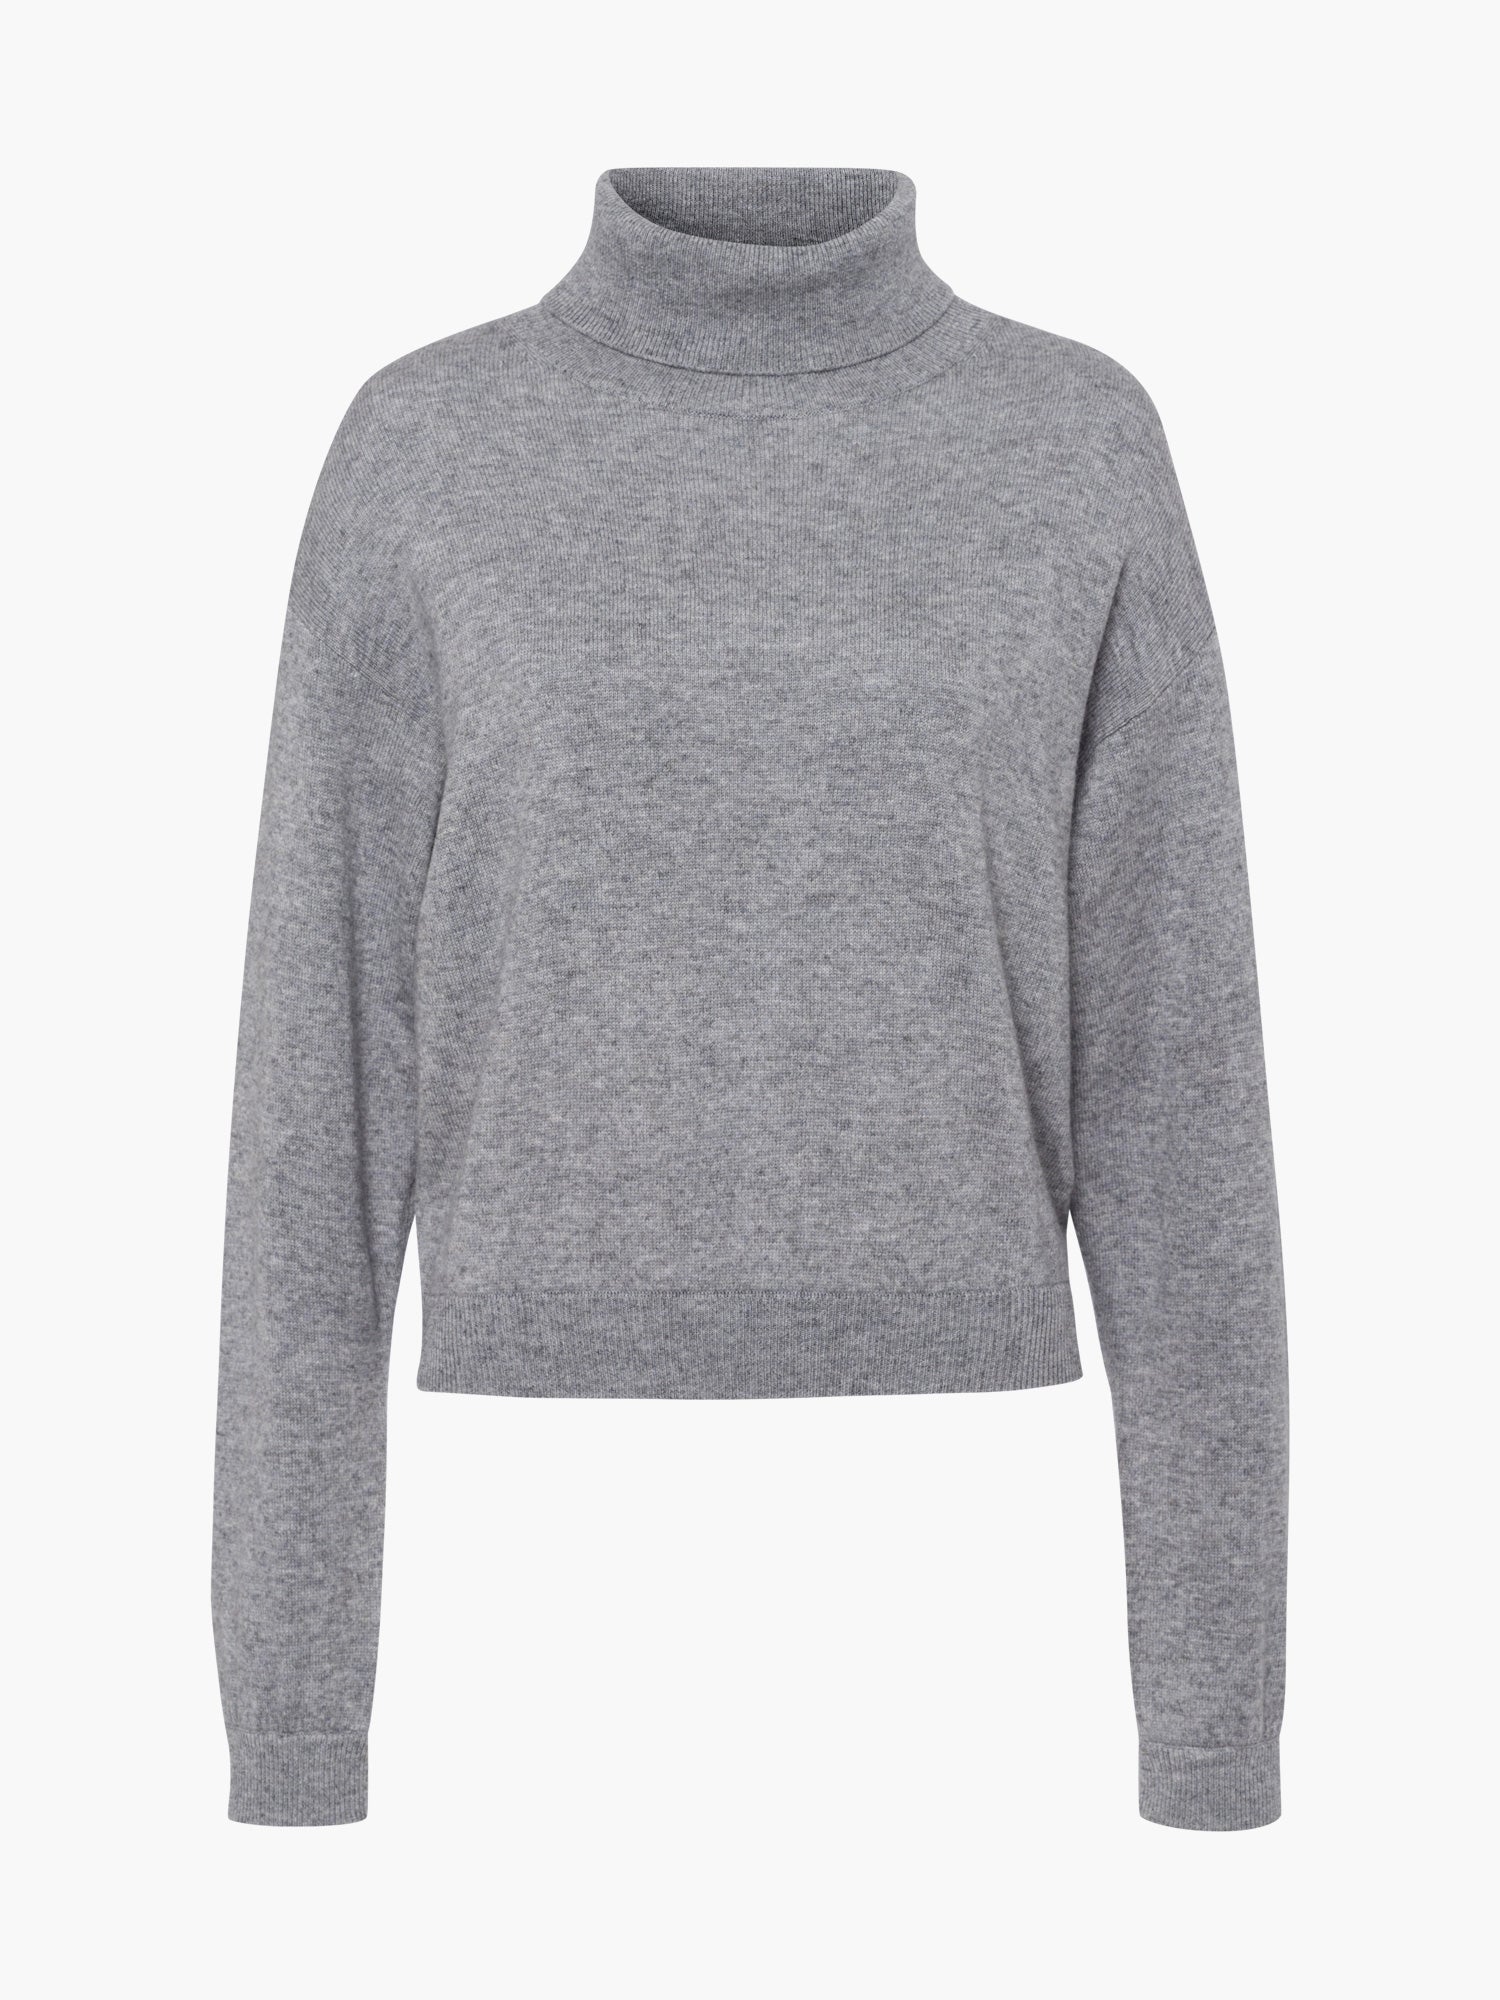 FTC-Cashmere-OUTLET-SALE-Pullover-Rollneck-Strick-ARCHIVE-COLLECTION_85977834-4fe8-4418-ad36-7b4866075b1b.jpg